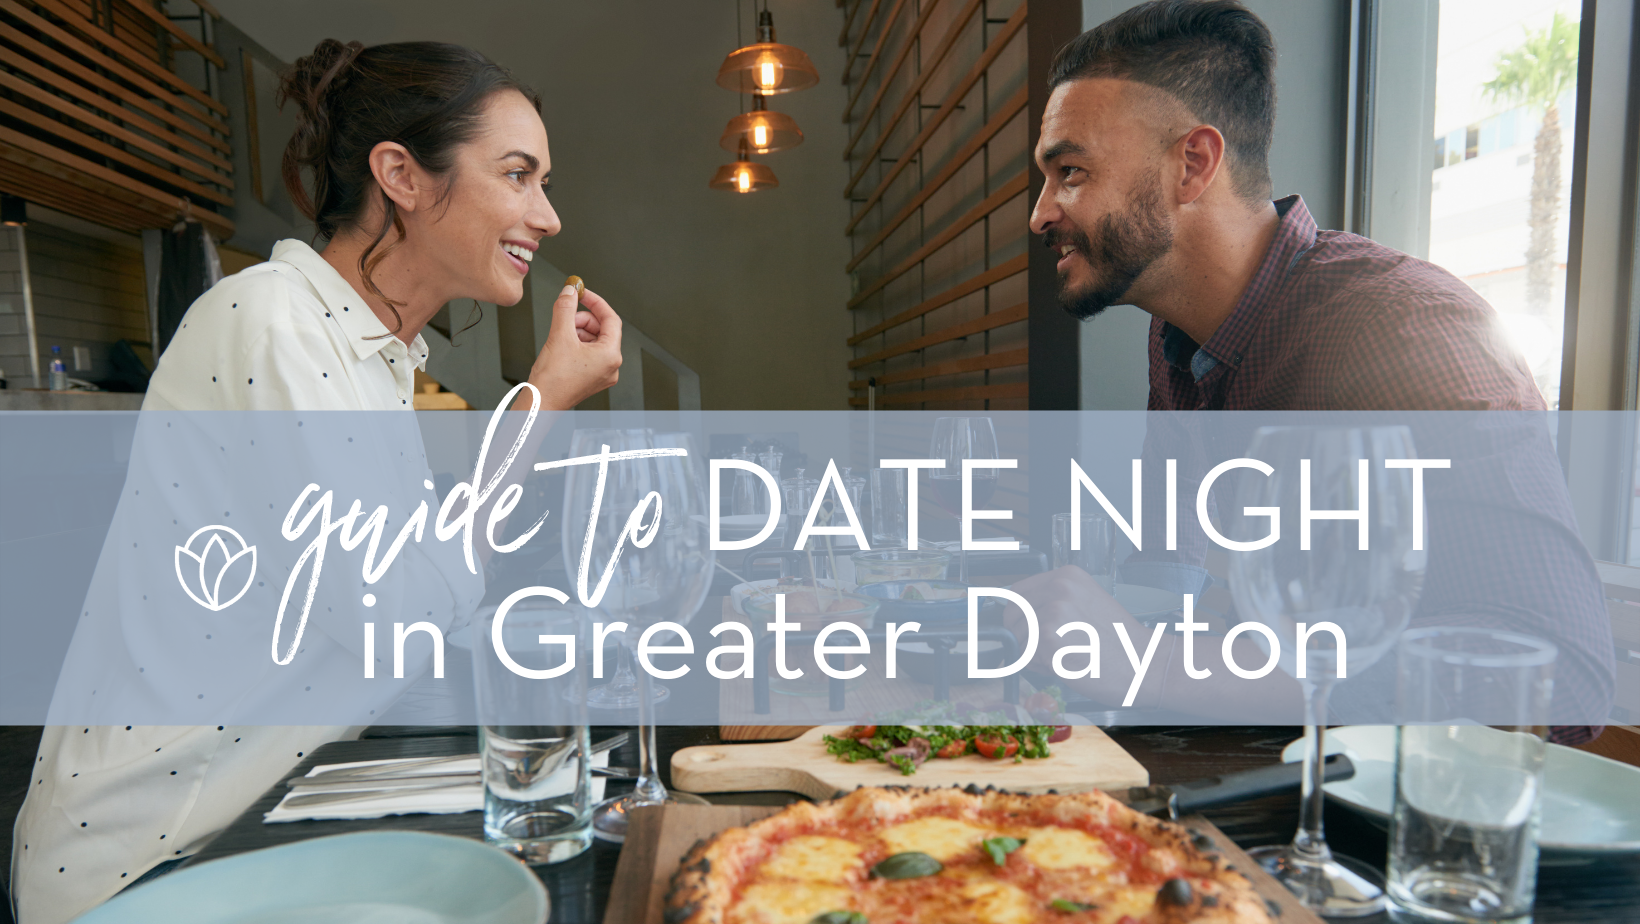 https://dayton.momcollective.com/wp-content/uploads/2020/02/DMC-Date-Night-FB.png